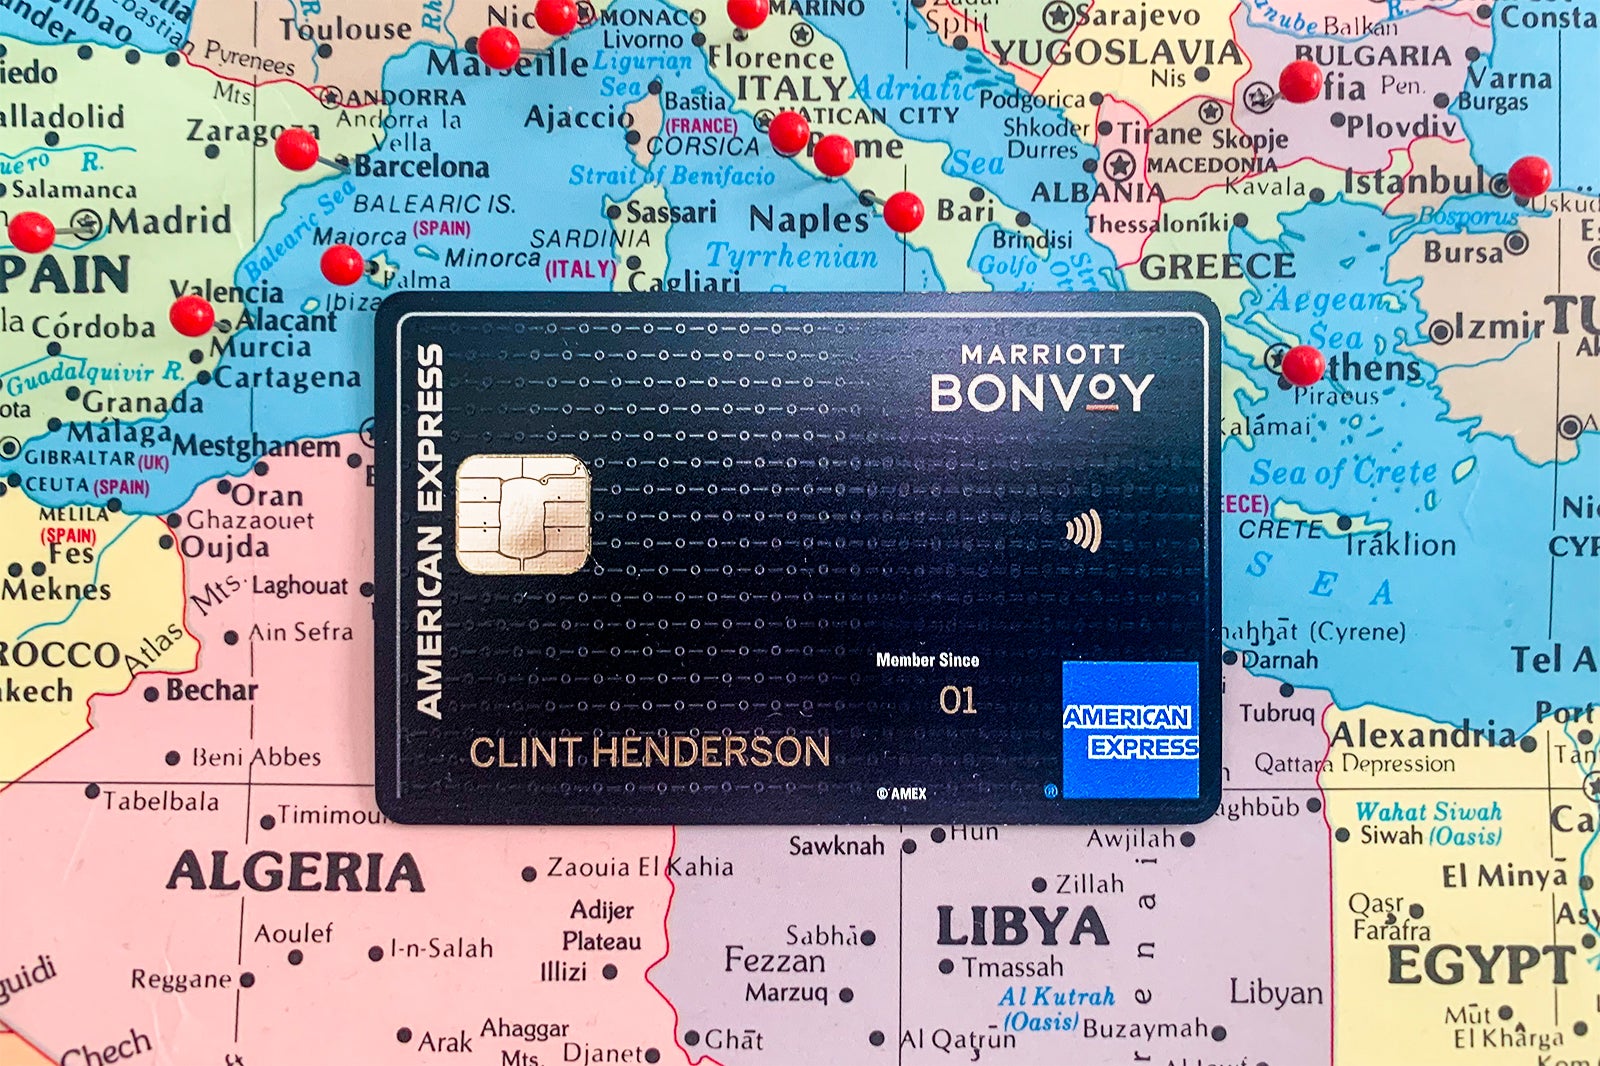 Photo of the Marriott Bonvoy Brilliant card on a world map.